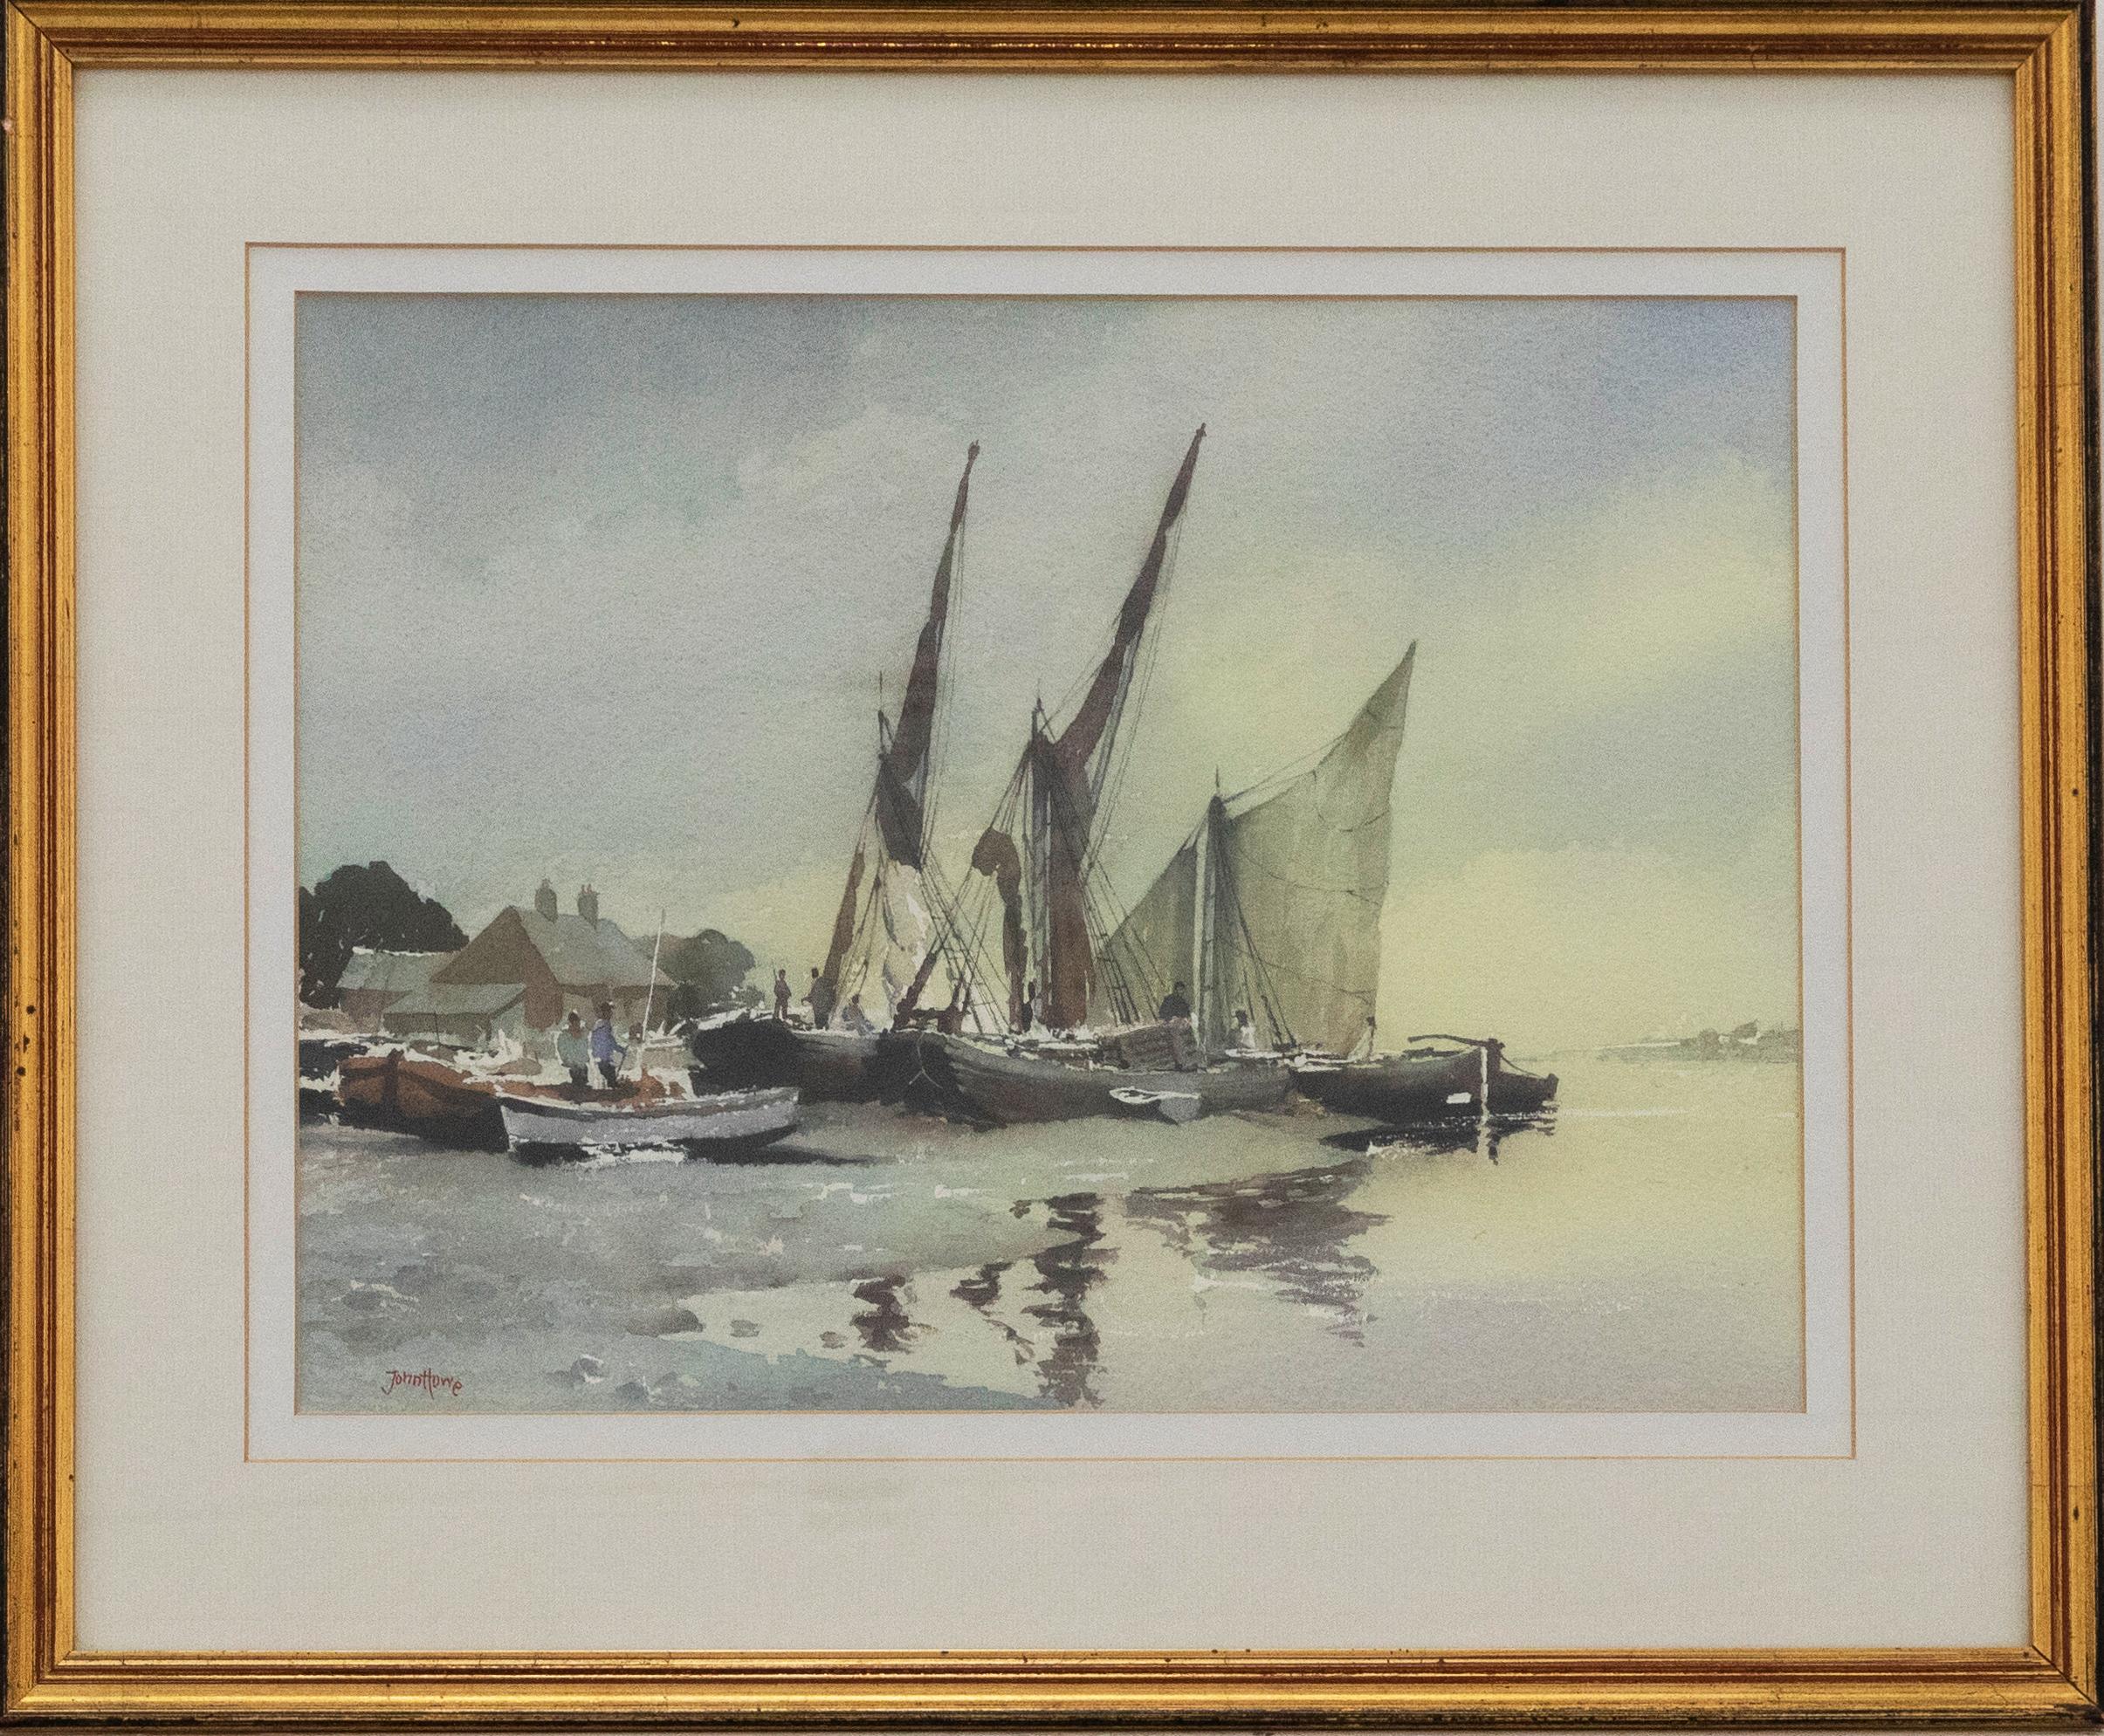 A serene watercolour scene of sailing barges beach to the side of an estuary at sun down. Signed by the artist to the lower right. Well-presented in a double card mount and gilt-effect frame. On watercolour paper.
